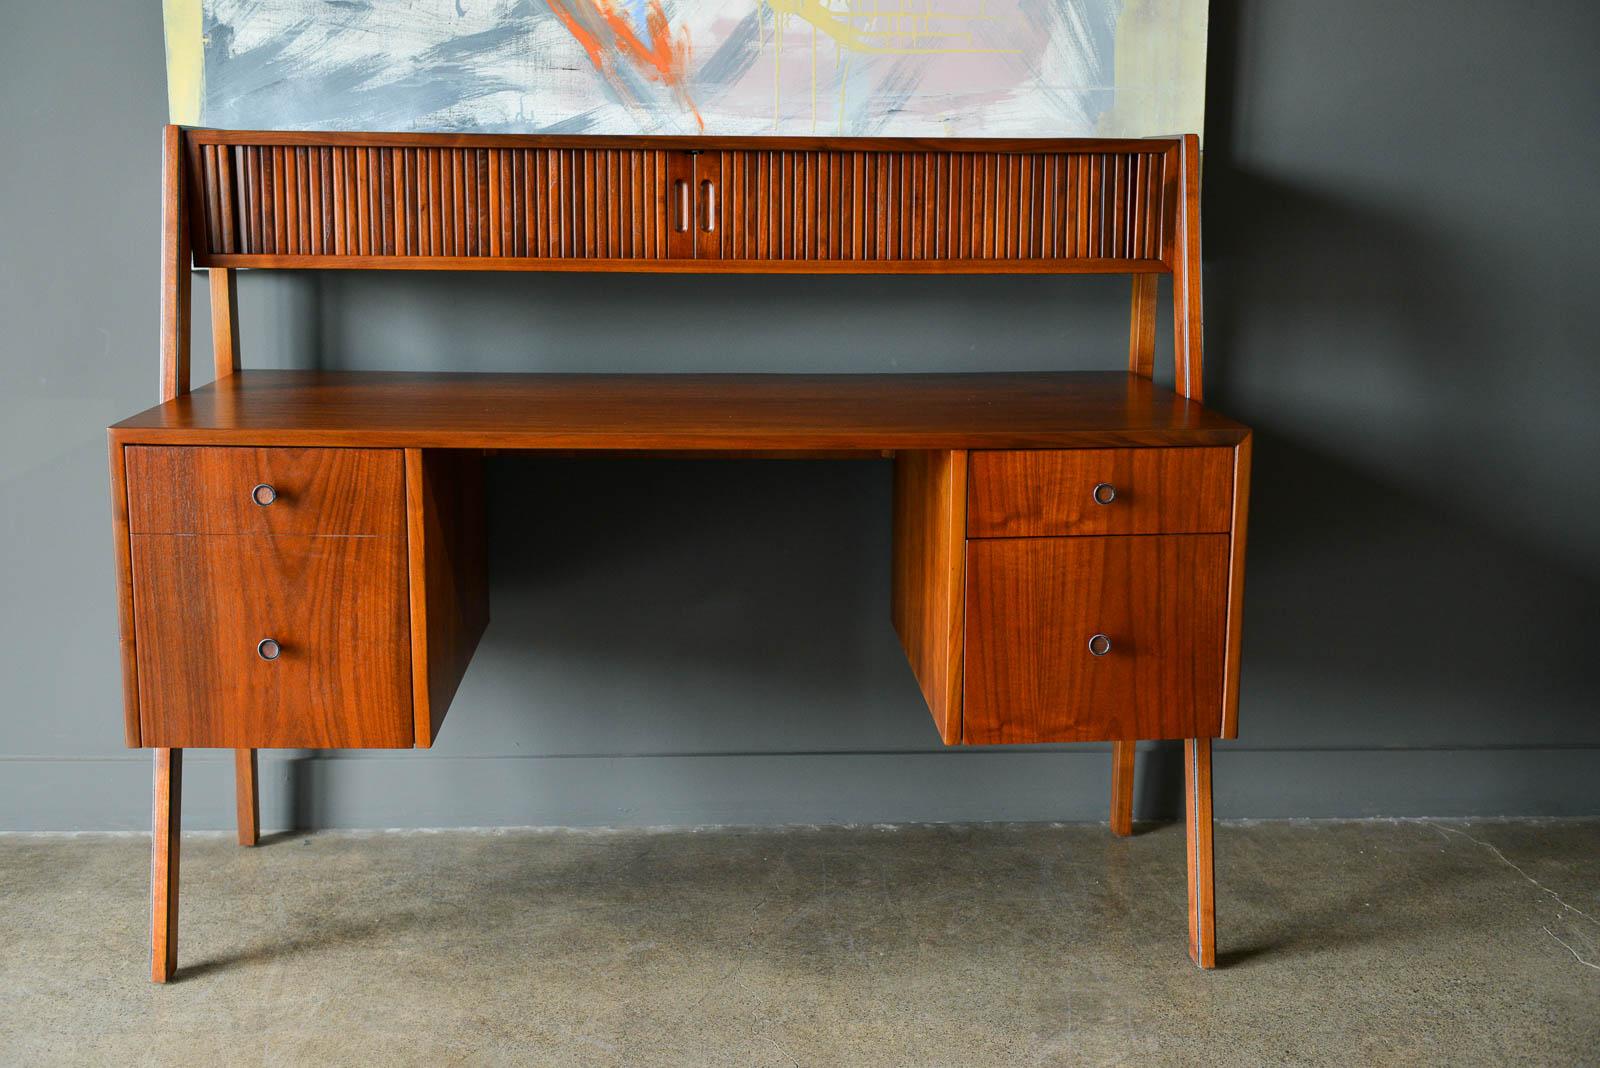 Walnut floating top tambour door desk, circa 1969. Professionally restored in showroom condition with original white upper shelf dividers. Gorgeous walnut grain and floating leg design. Finished on the reverse so it can be floated in the middle of